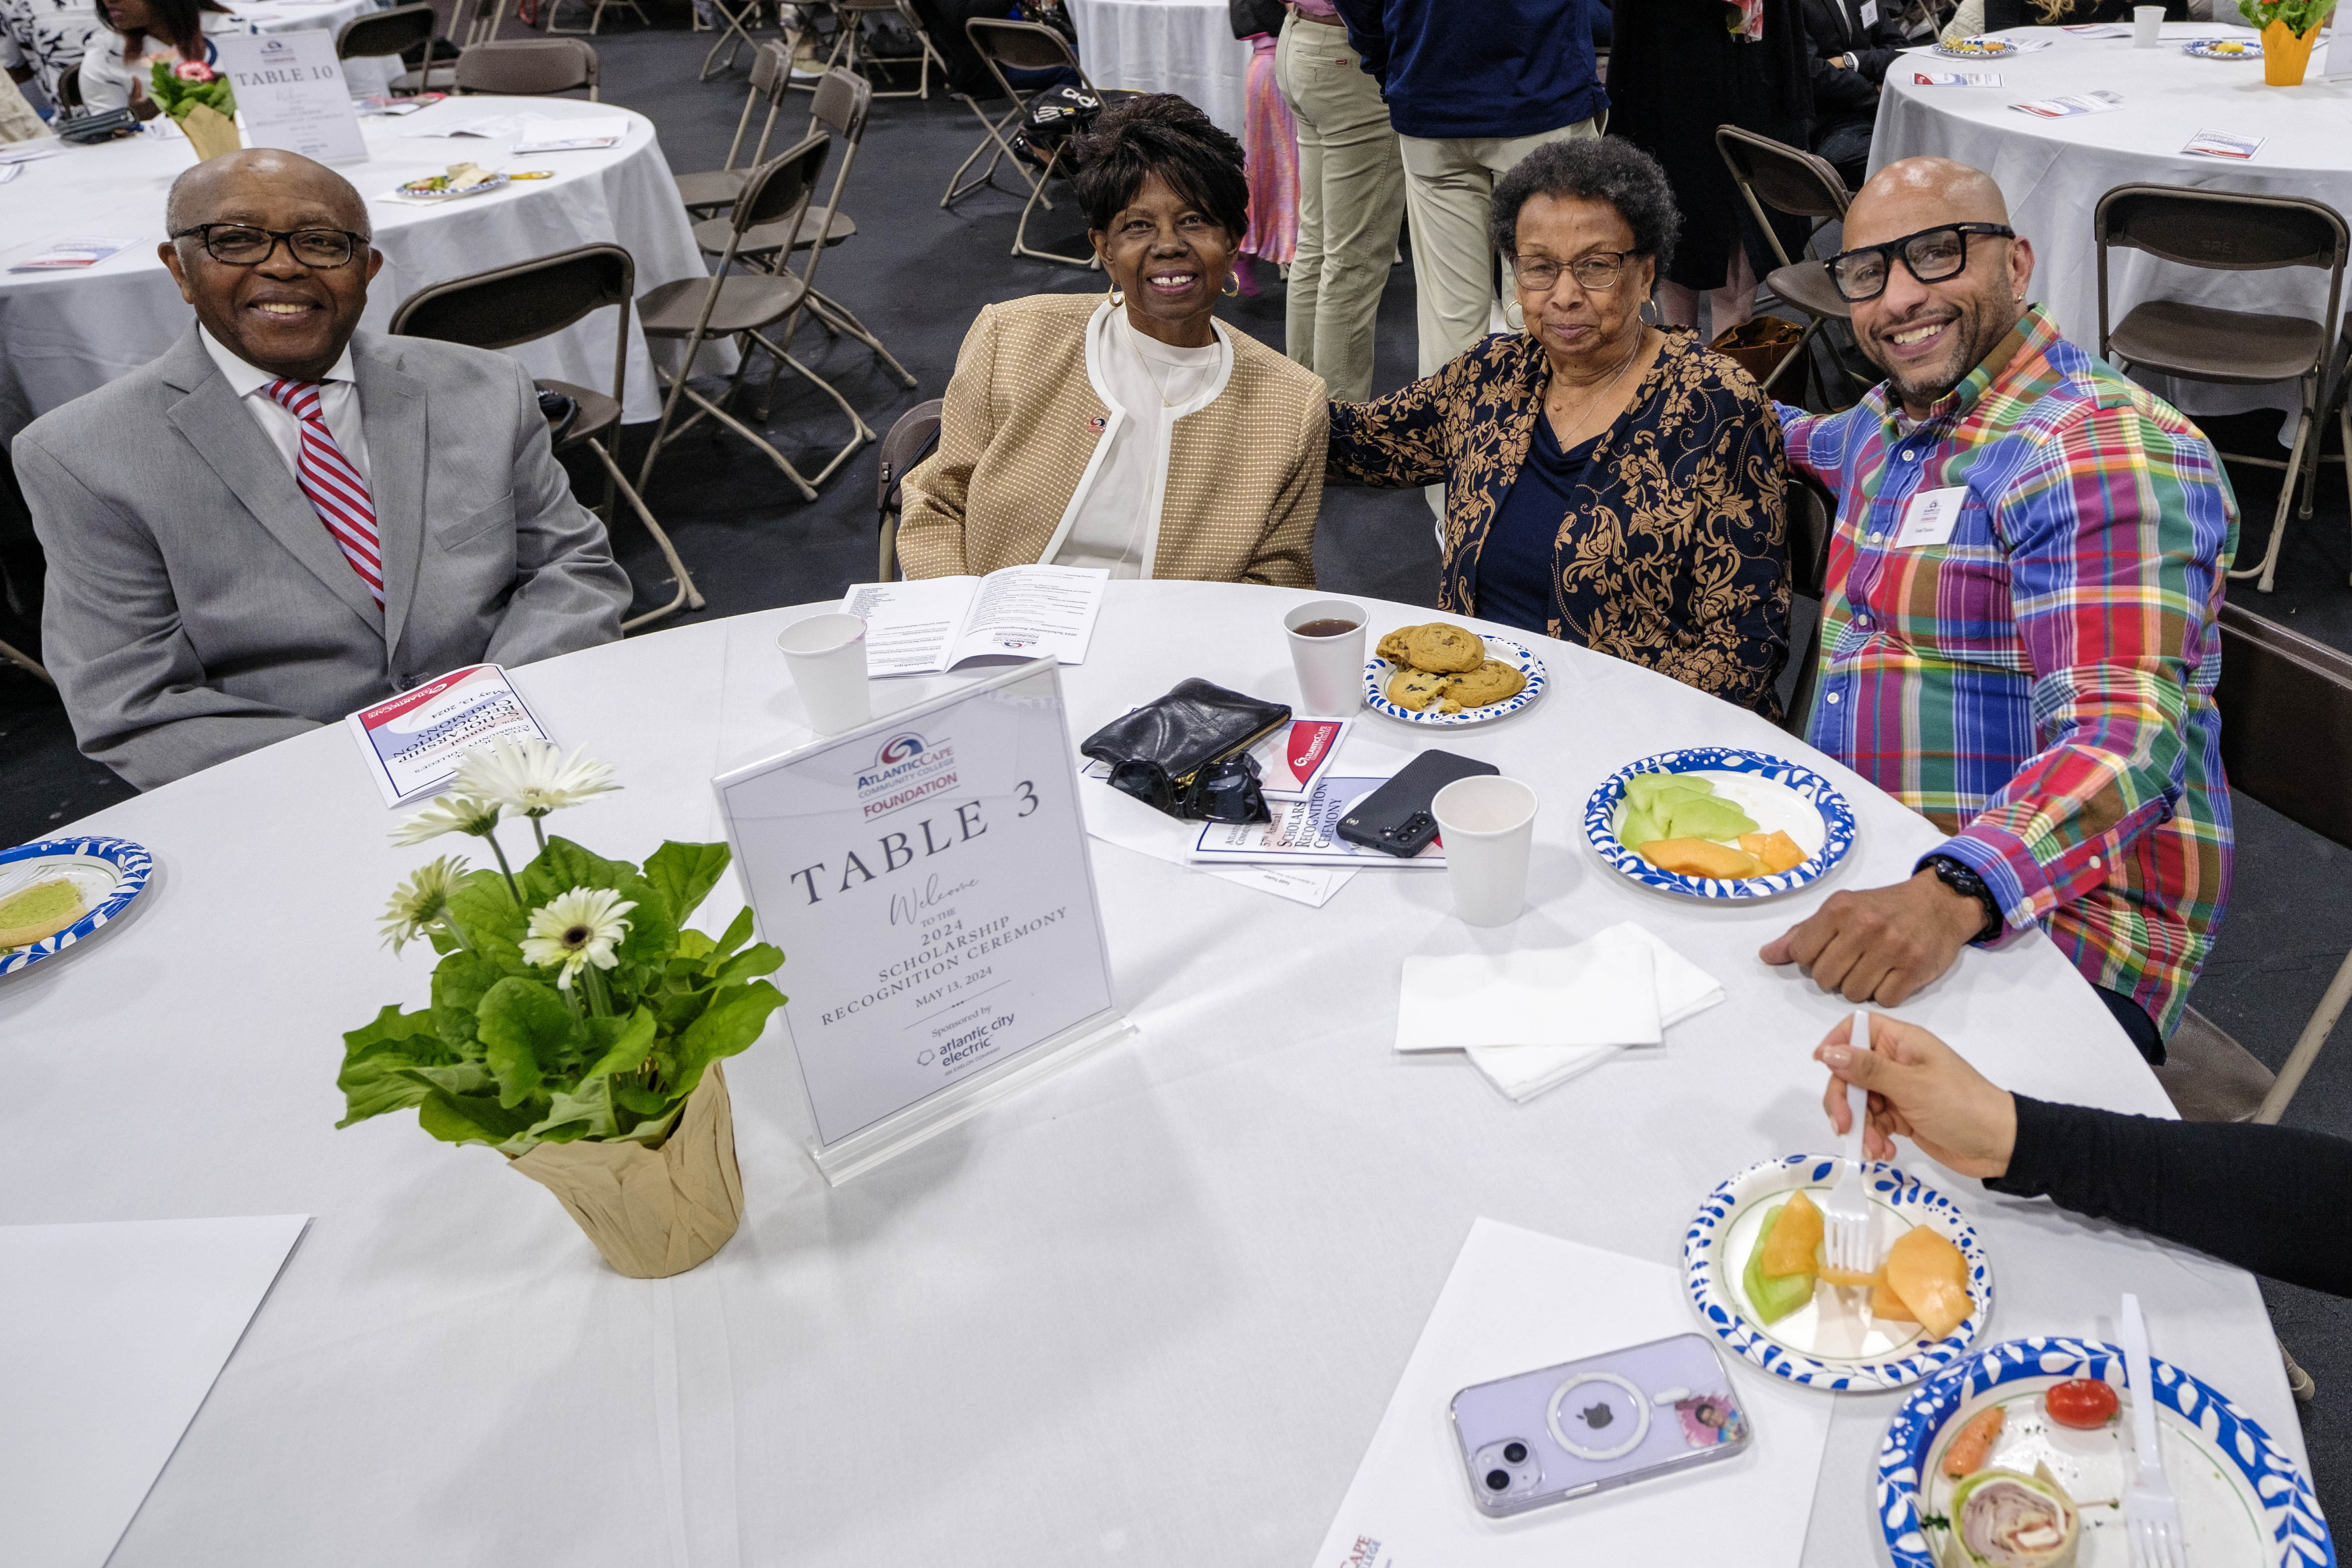 Atlantic Cape President Dr. Barbara at a table with her husband and guests